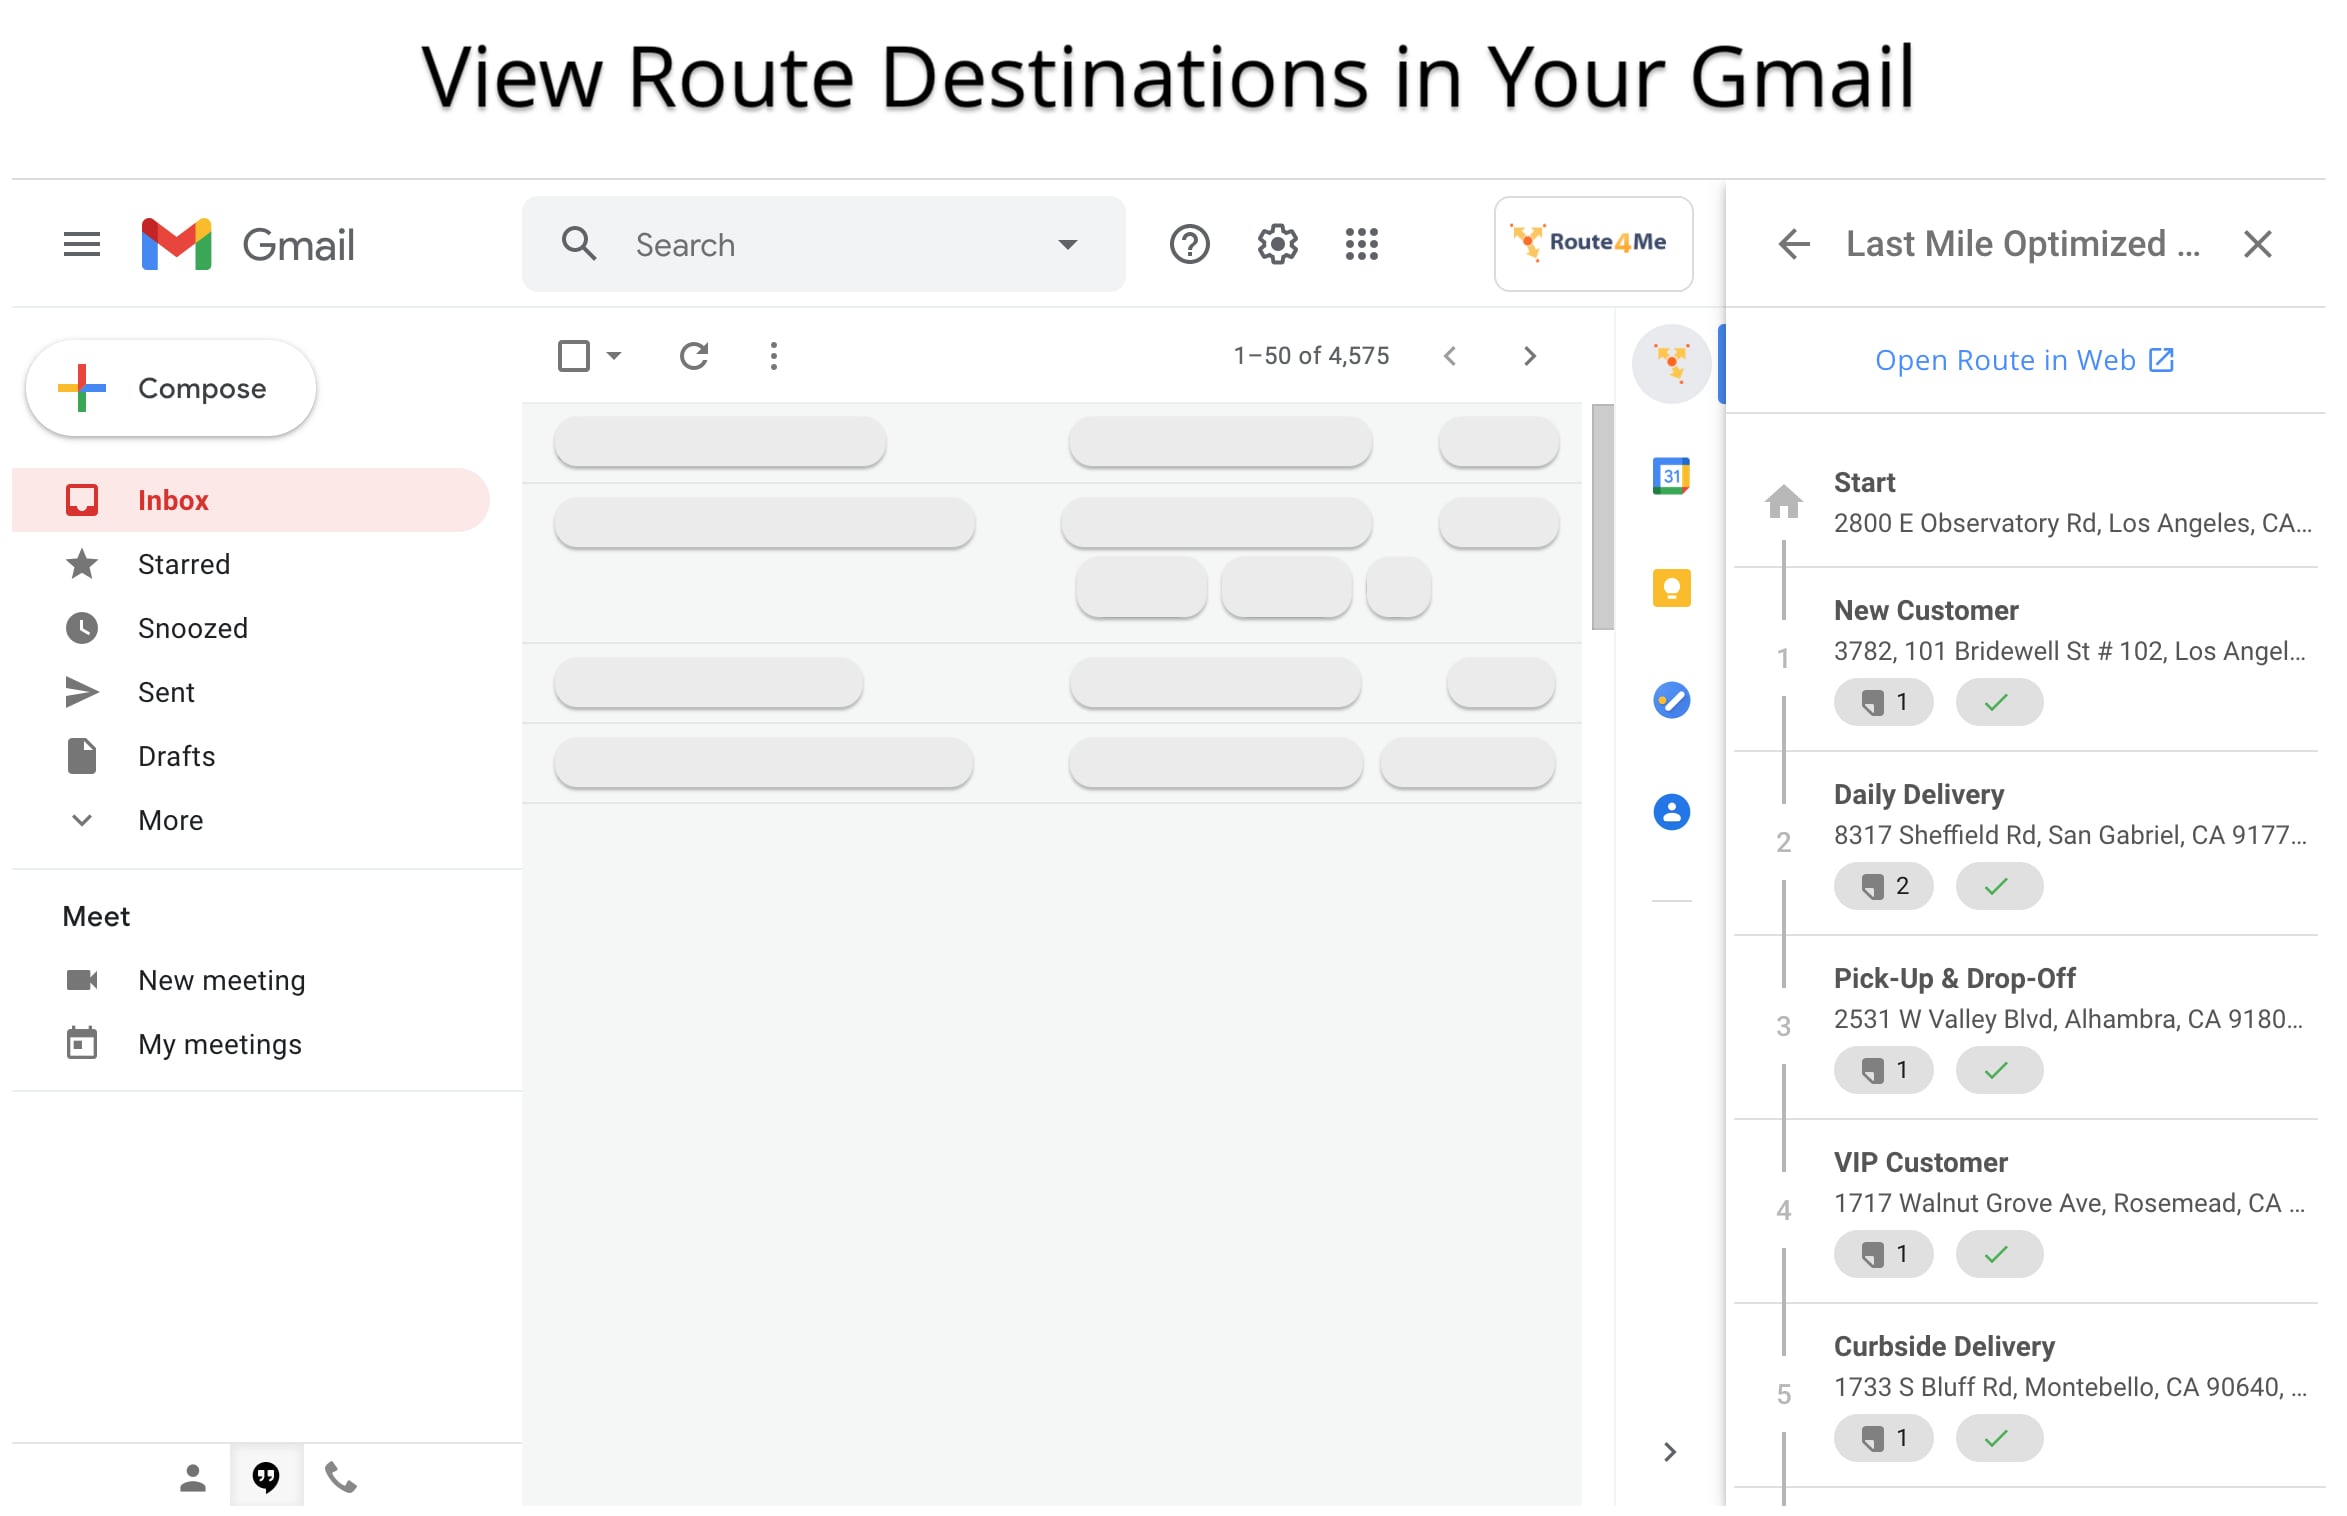 Open and view your planned and scheduled route destinations in your Gmail with Route4Me for Chrome